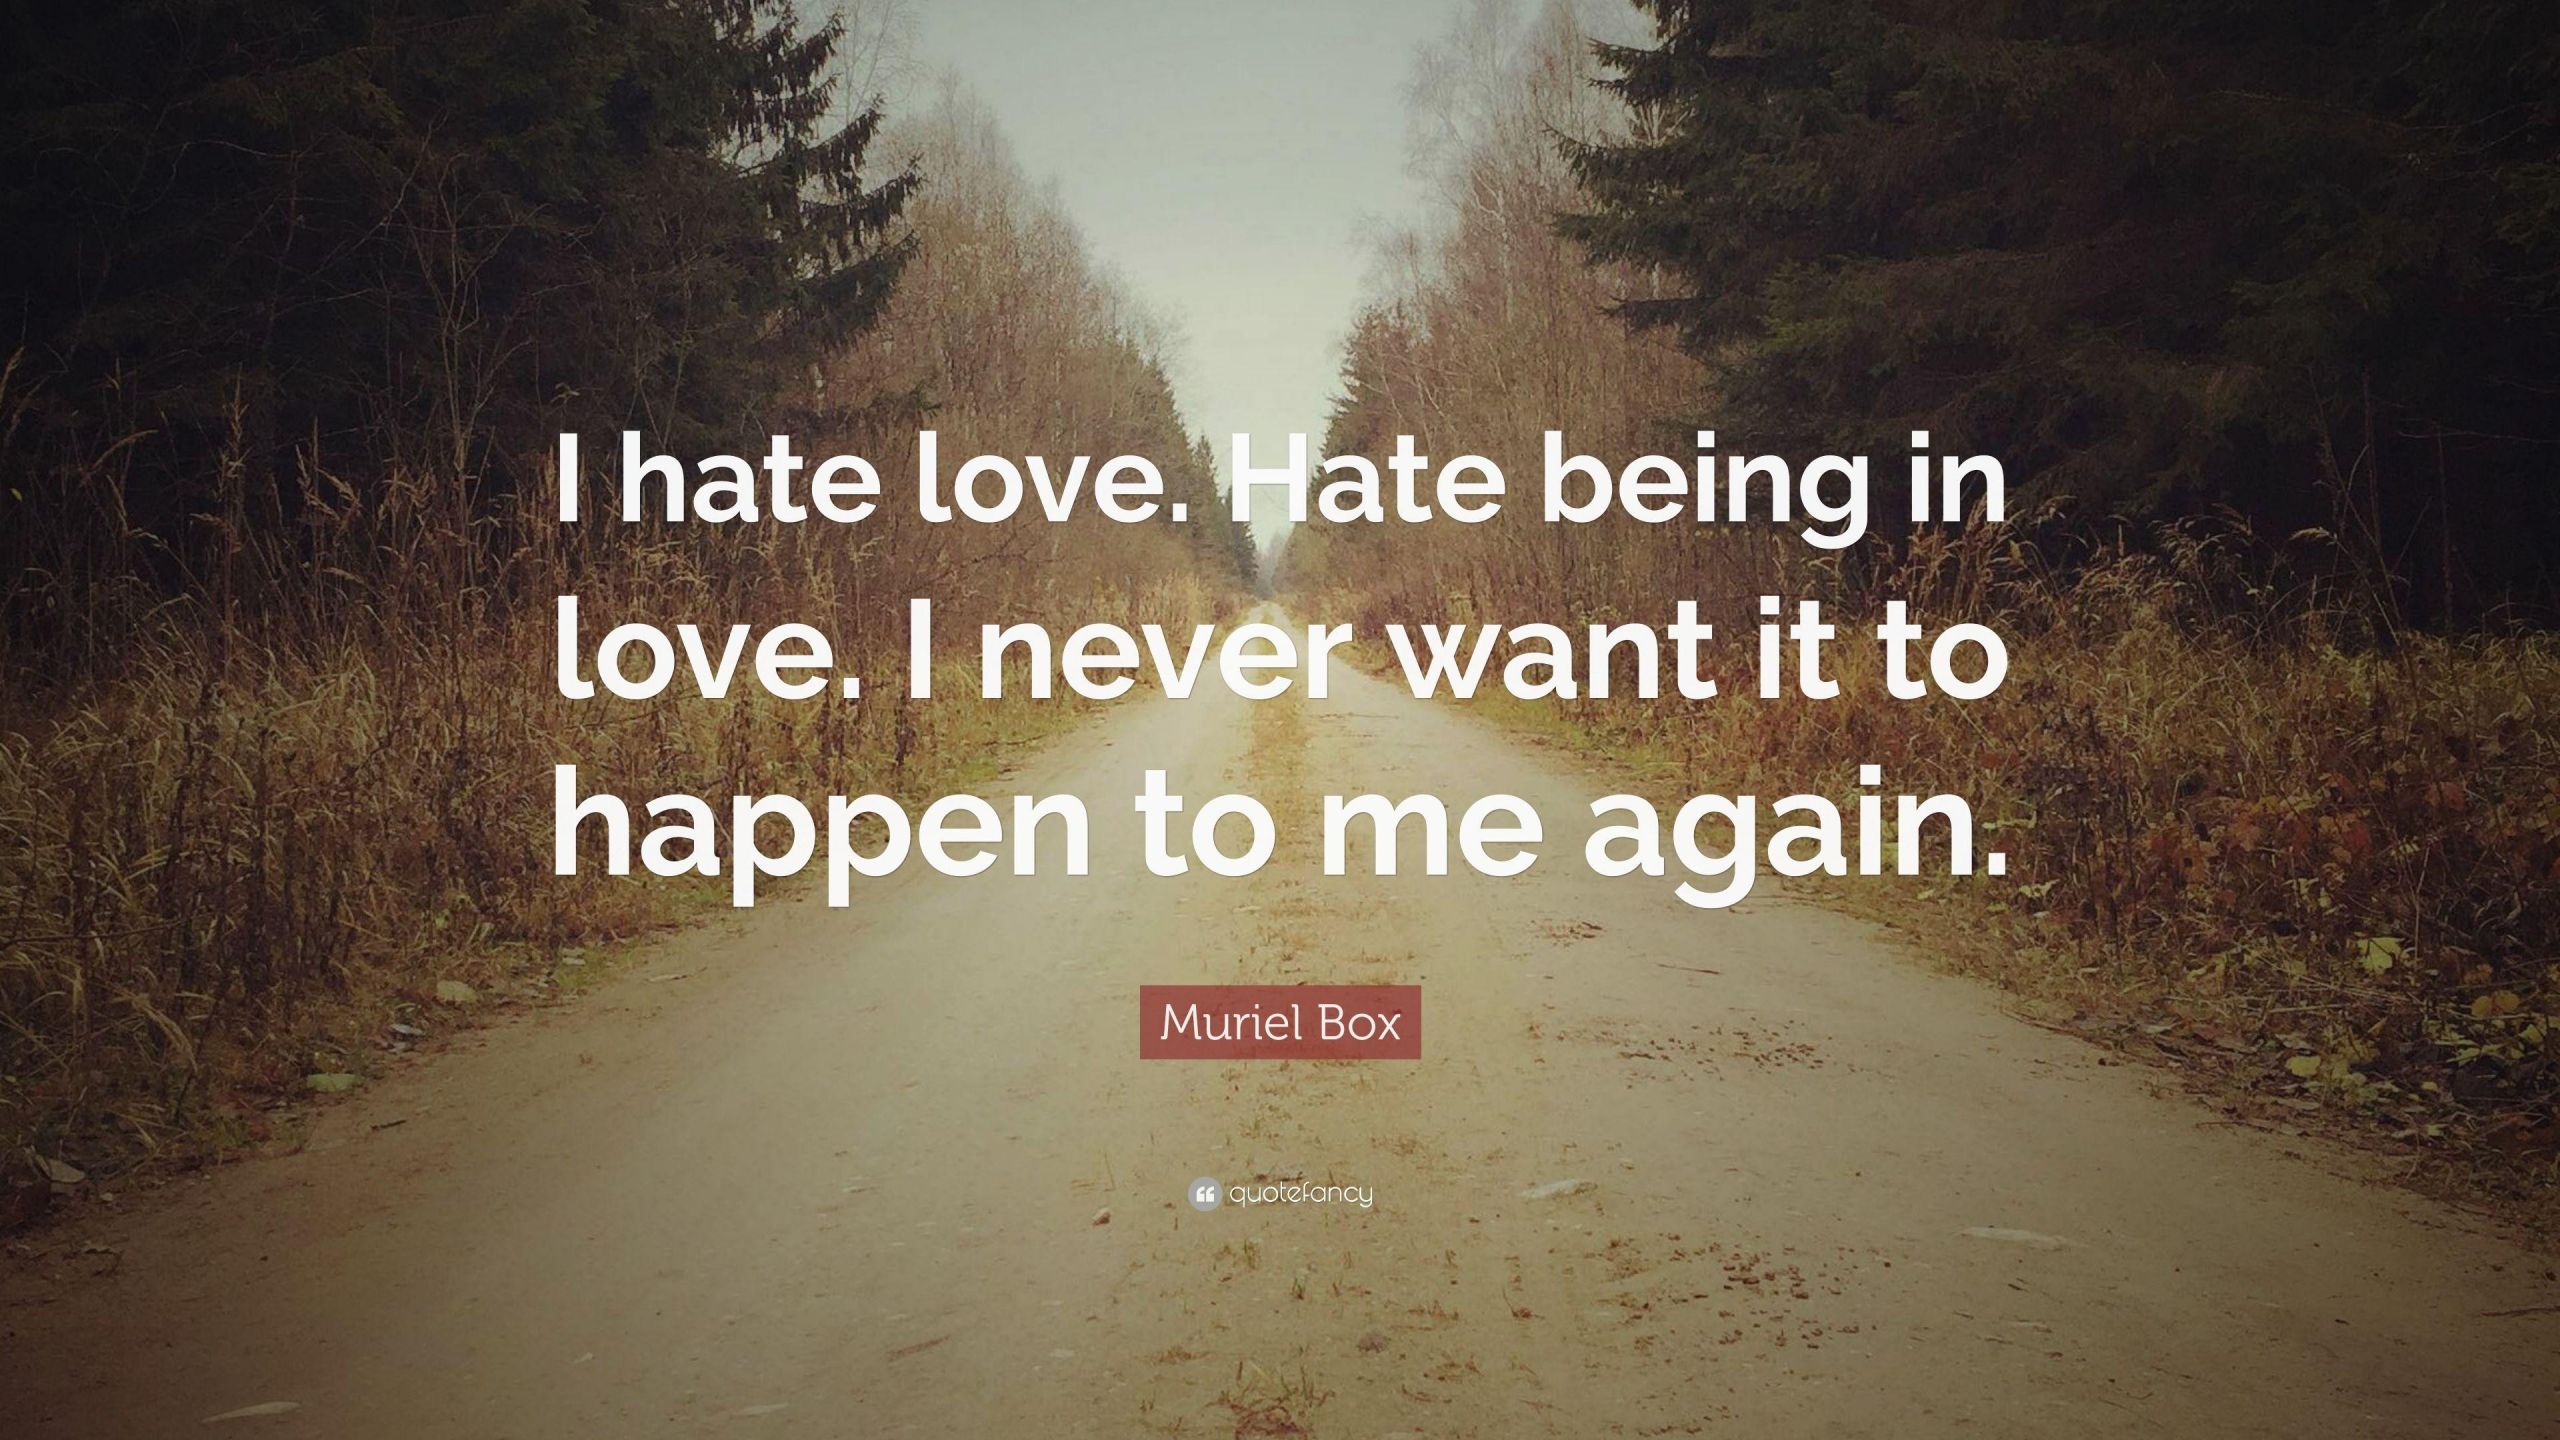 Quote About Hating Love
 Hate Love Wallpapers Wallpaper Cave